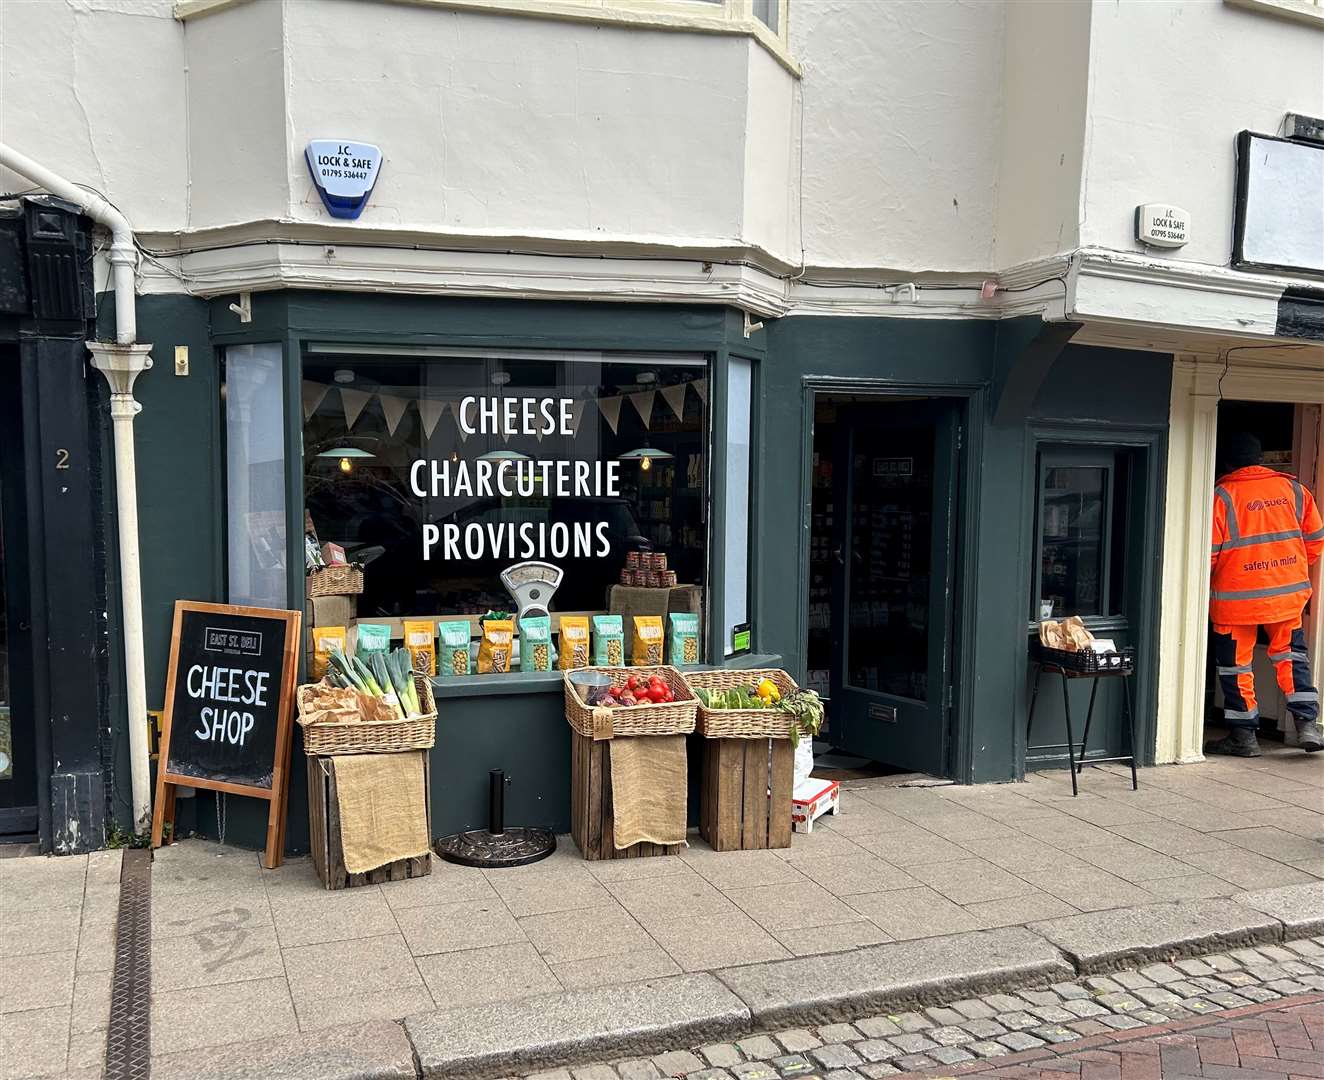 Alcohol can now be sold at East Street Deli in Faversham